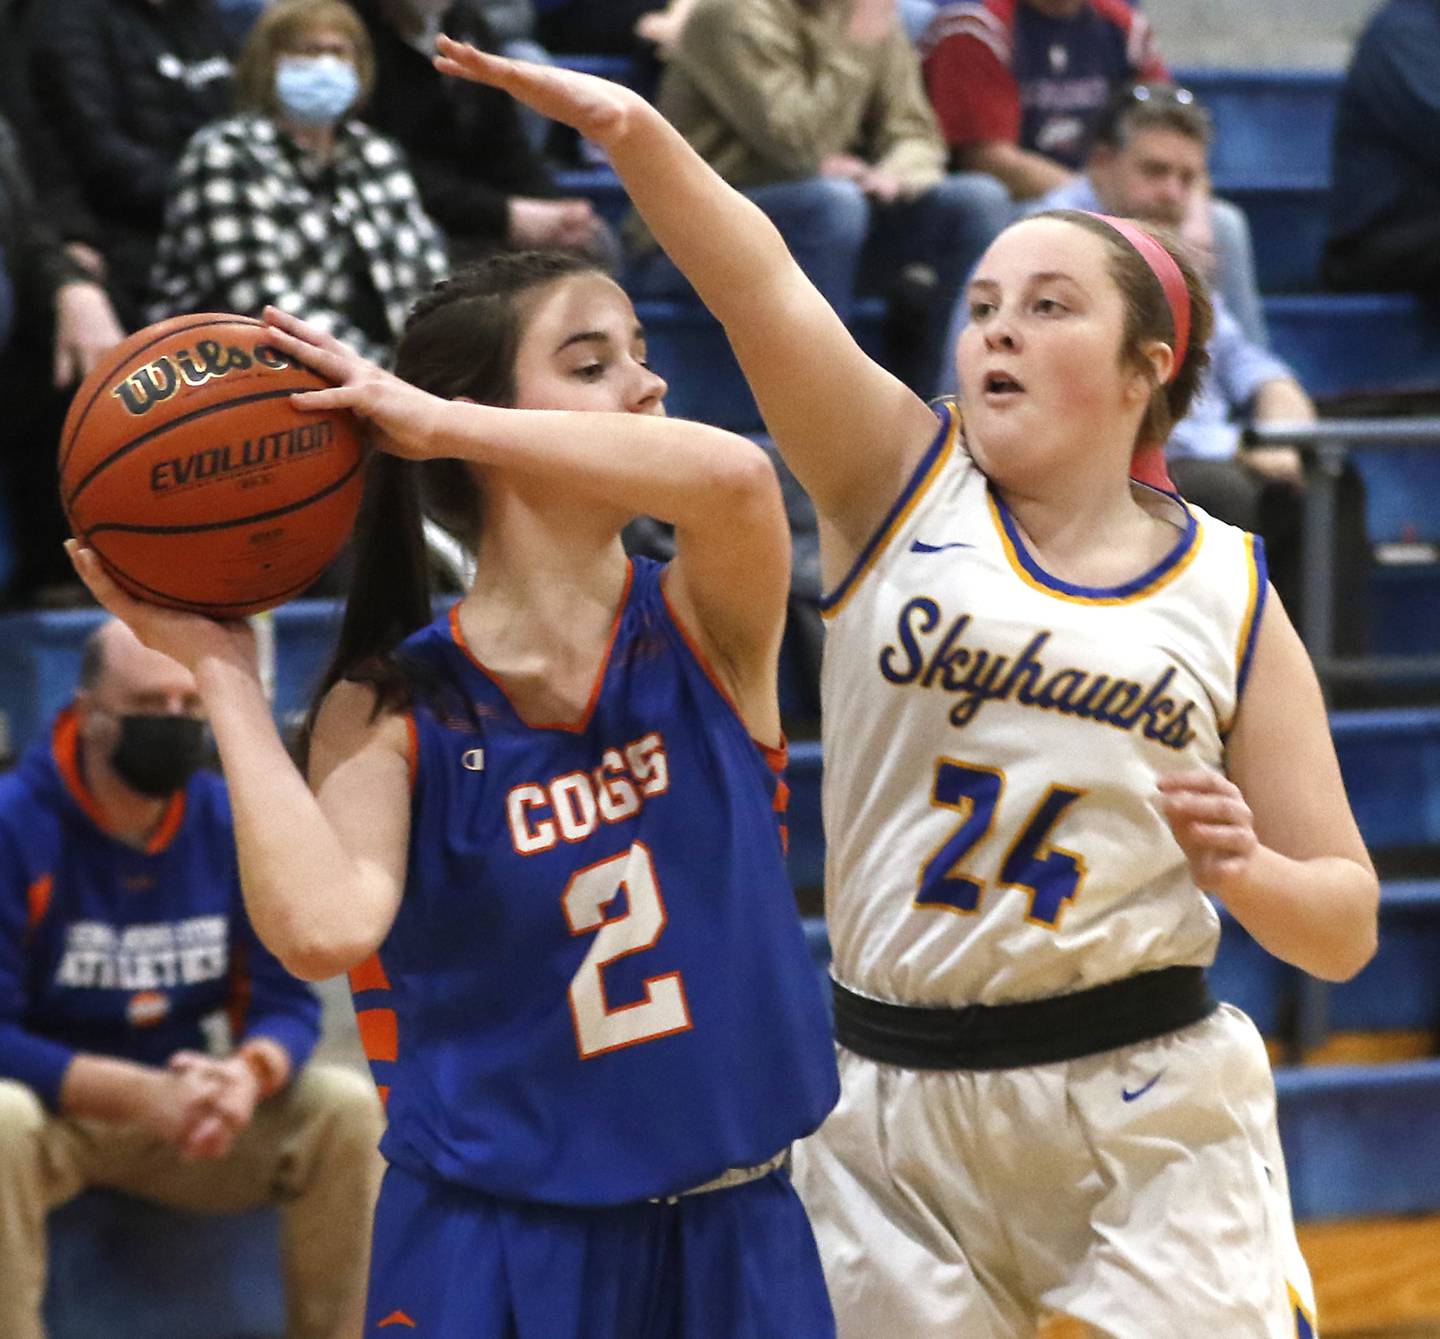 Johnsburg's Mackenzie McQuistion, right, applies defensive pressure to Genoa-Kingston's Emily Gilbert during a IHSA Class 2A Regional semifinal basketball game Monday evening, Feb. 14, 2022, between Johnsburg and Genoa-Kingston at Marian Central High School.